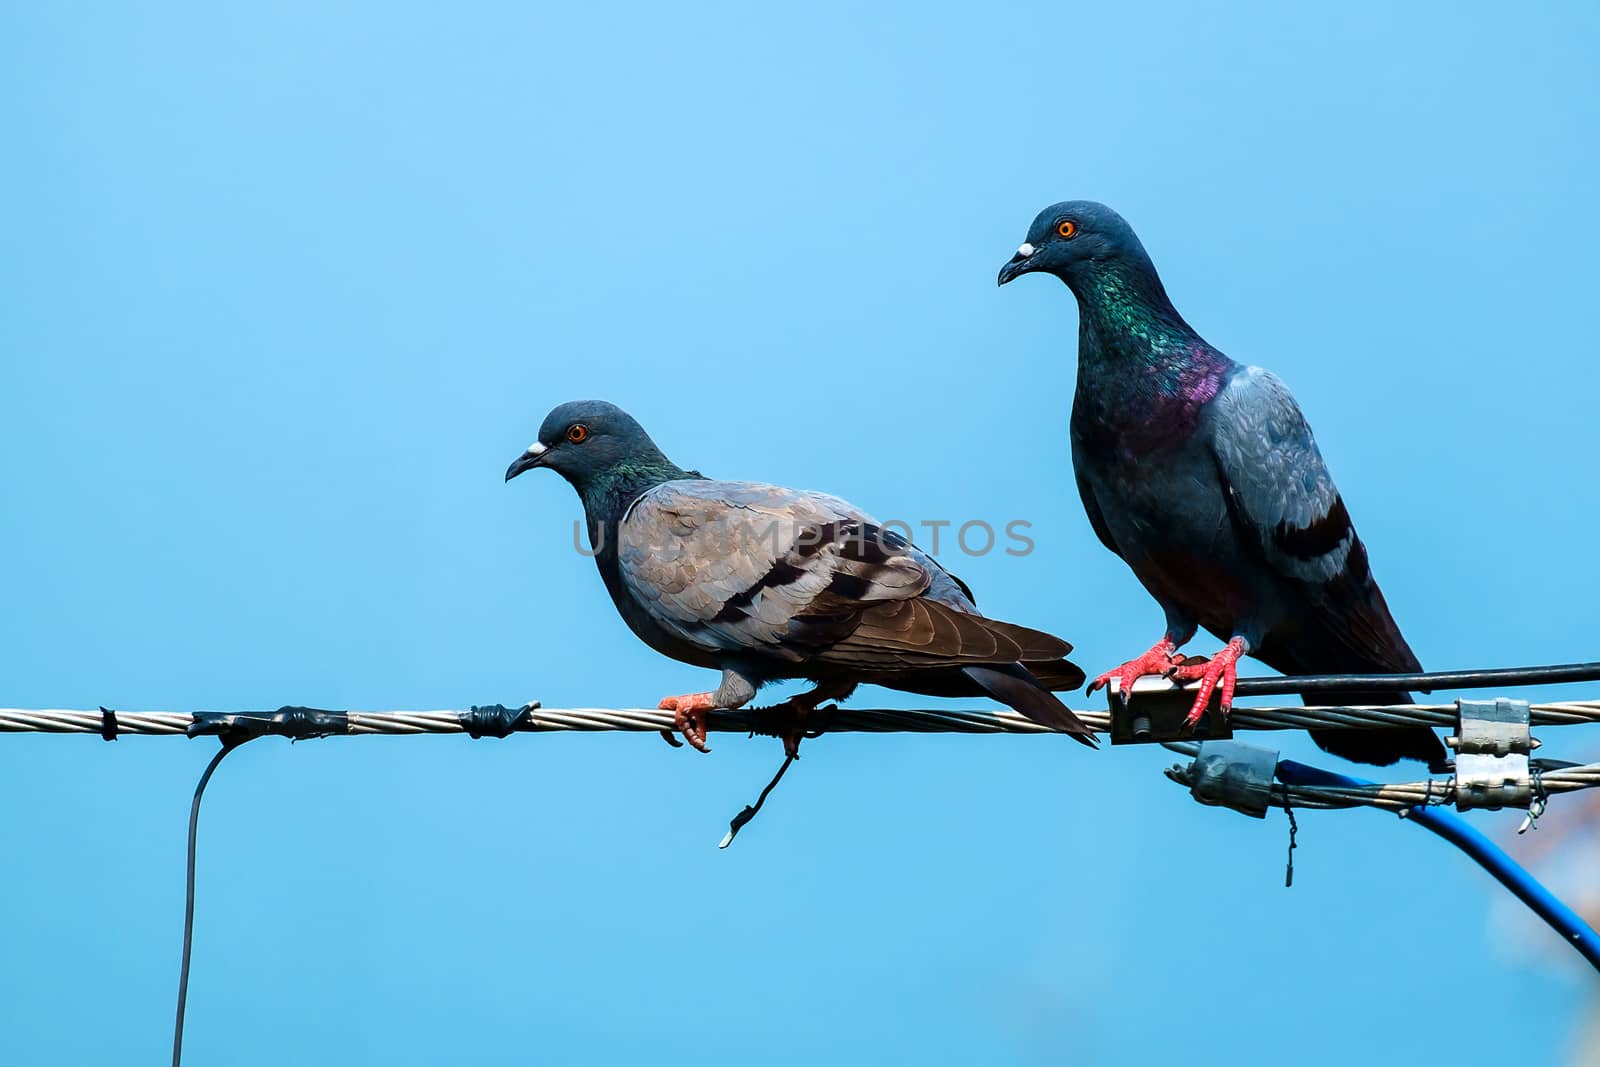 Couple of pigeon on the wire by iamnoonmai